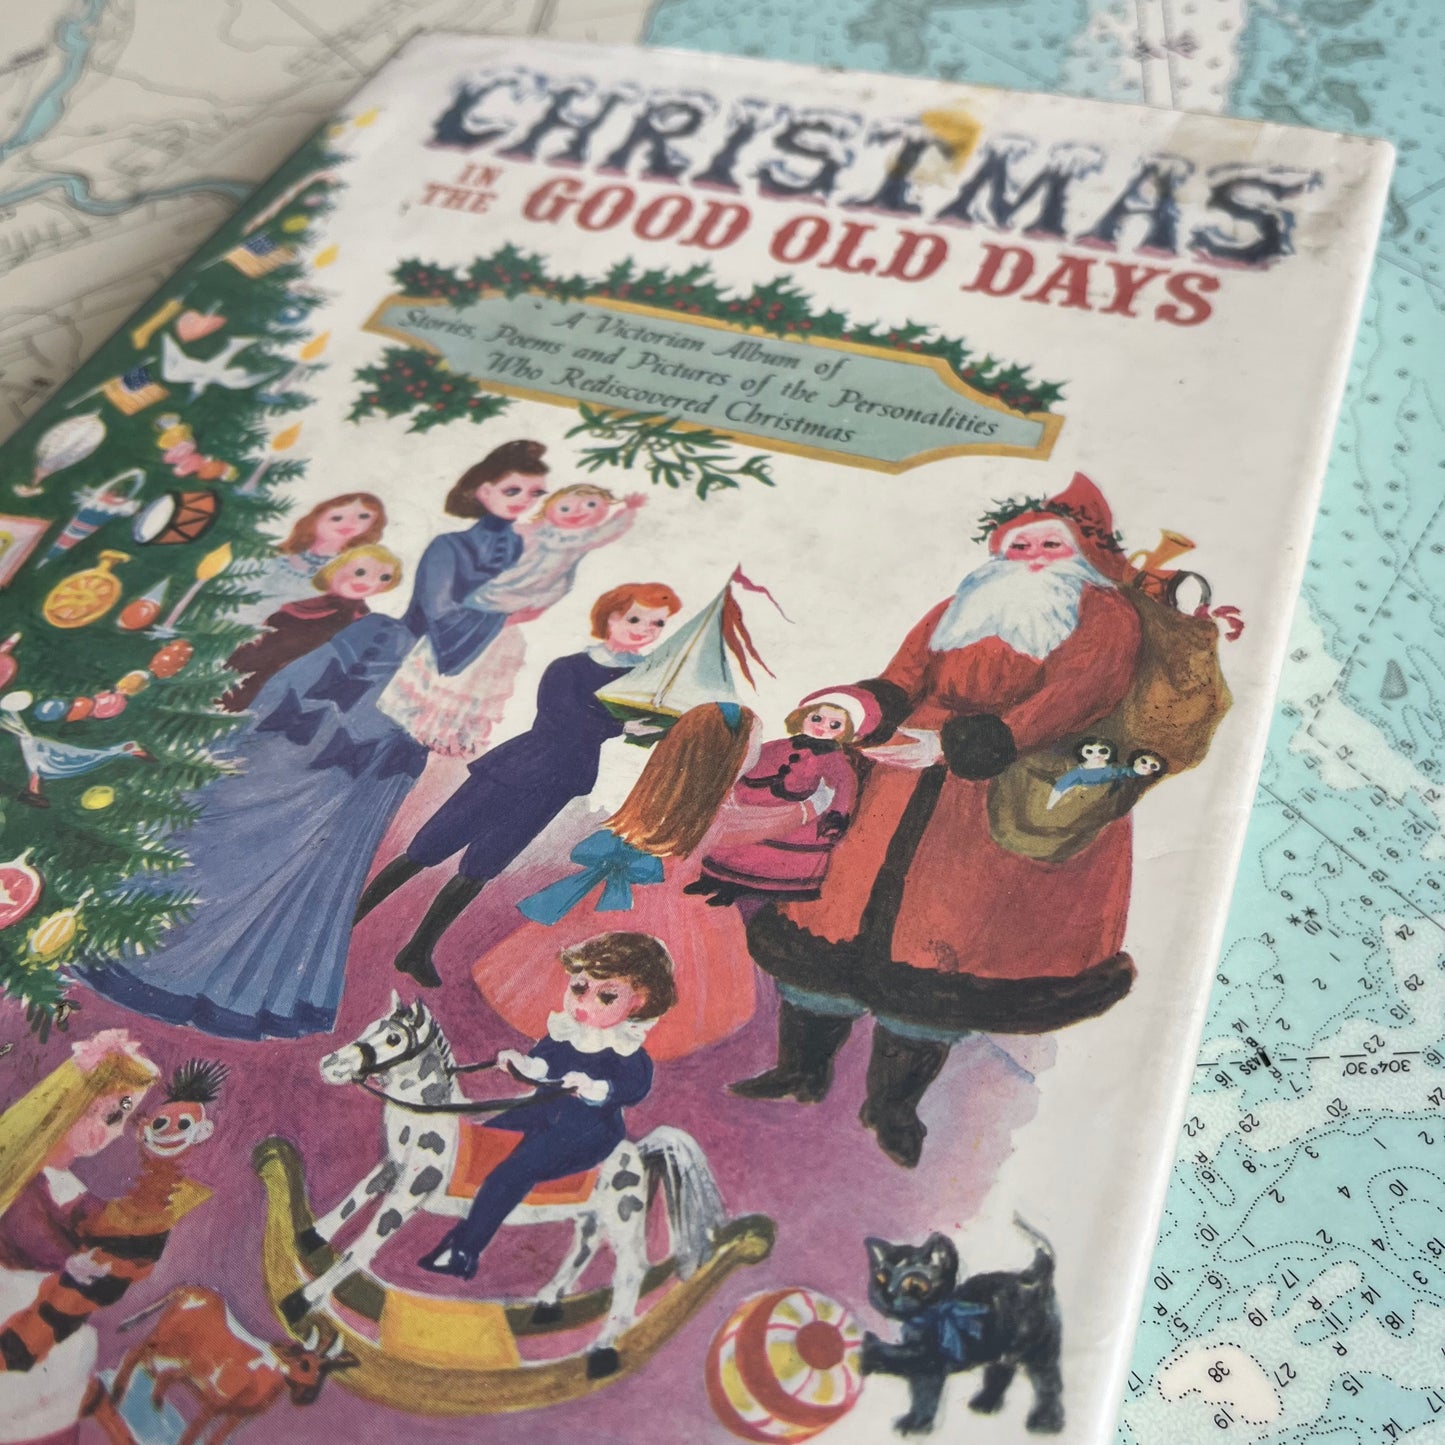 Vintage 1961 Christmas in the Good Old Days Hardcover Book